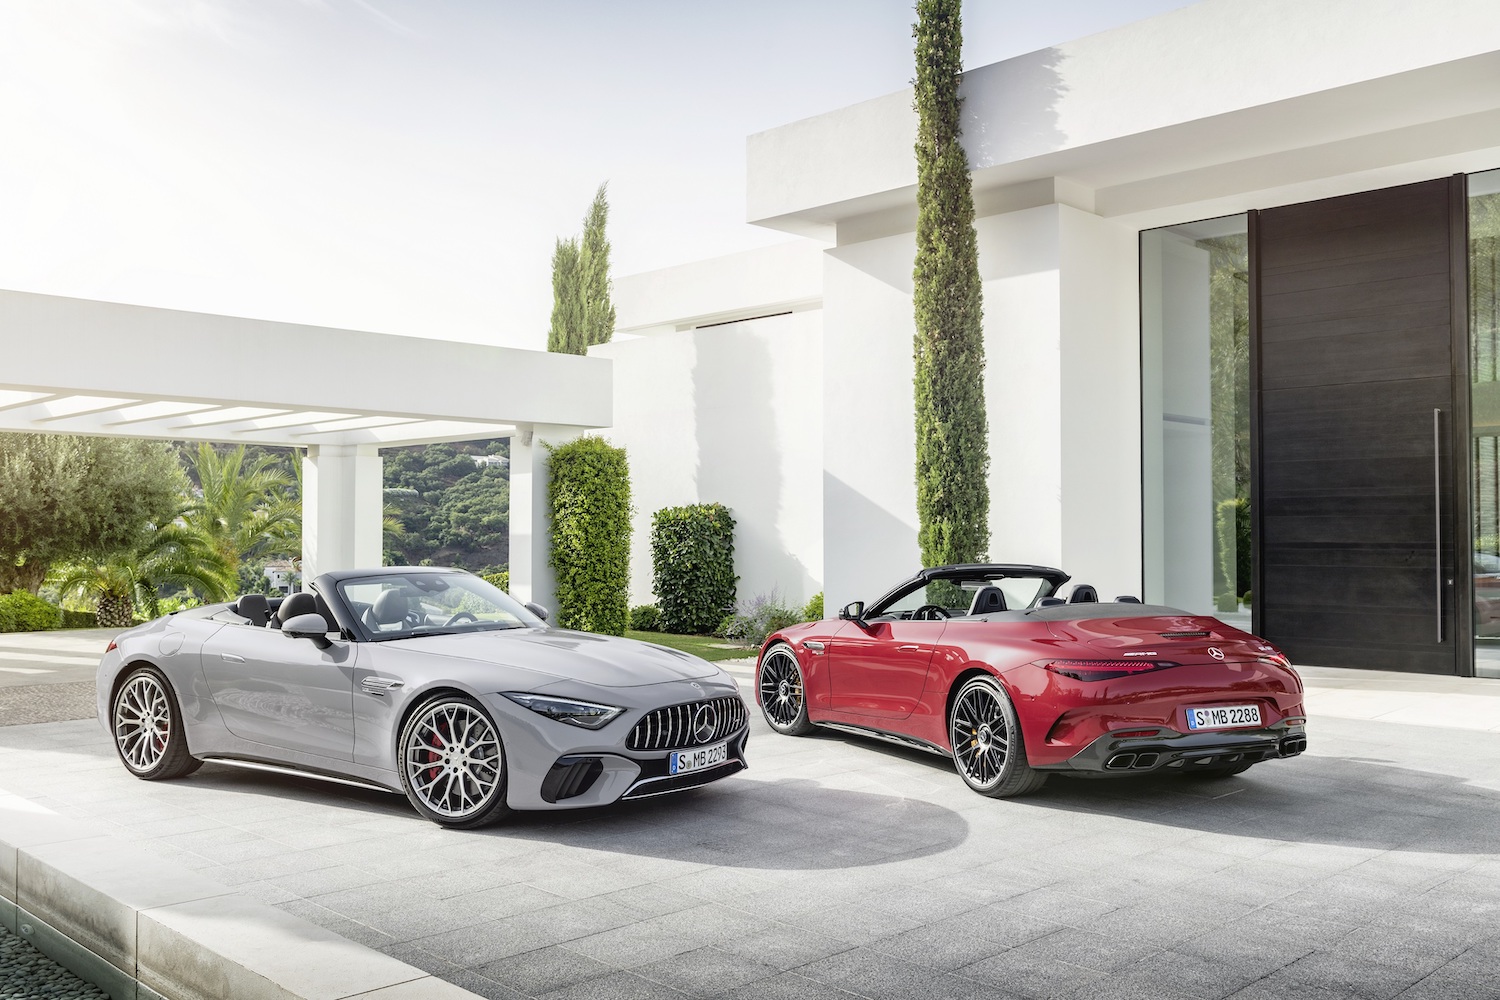 The 2023 MercedesAMG SL 55 4MATIC+ The Luxurious Roadster for Everyday Use The Luxury